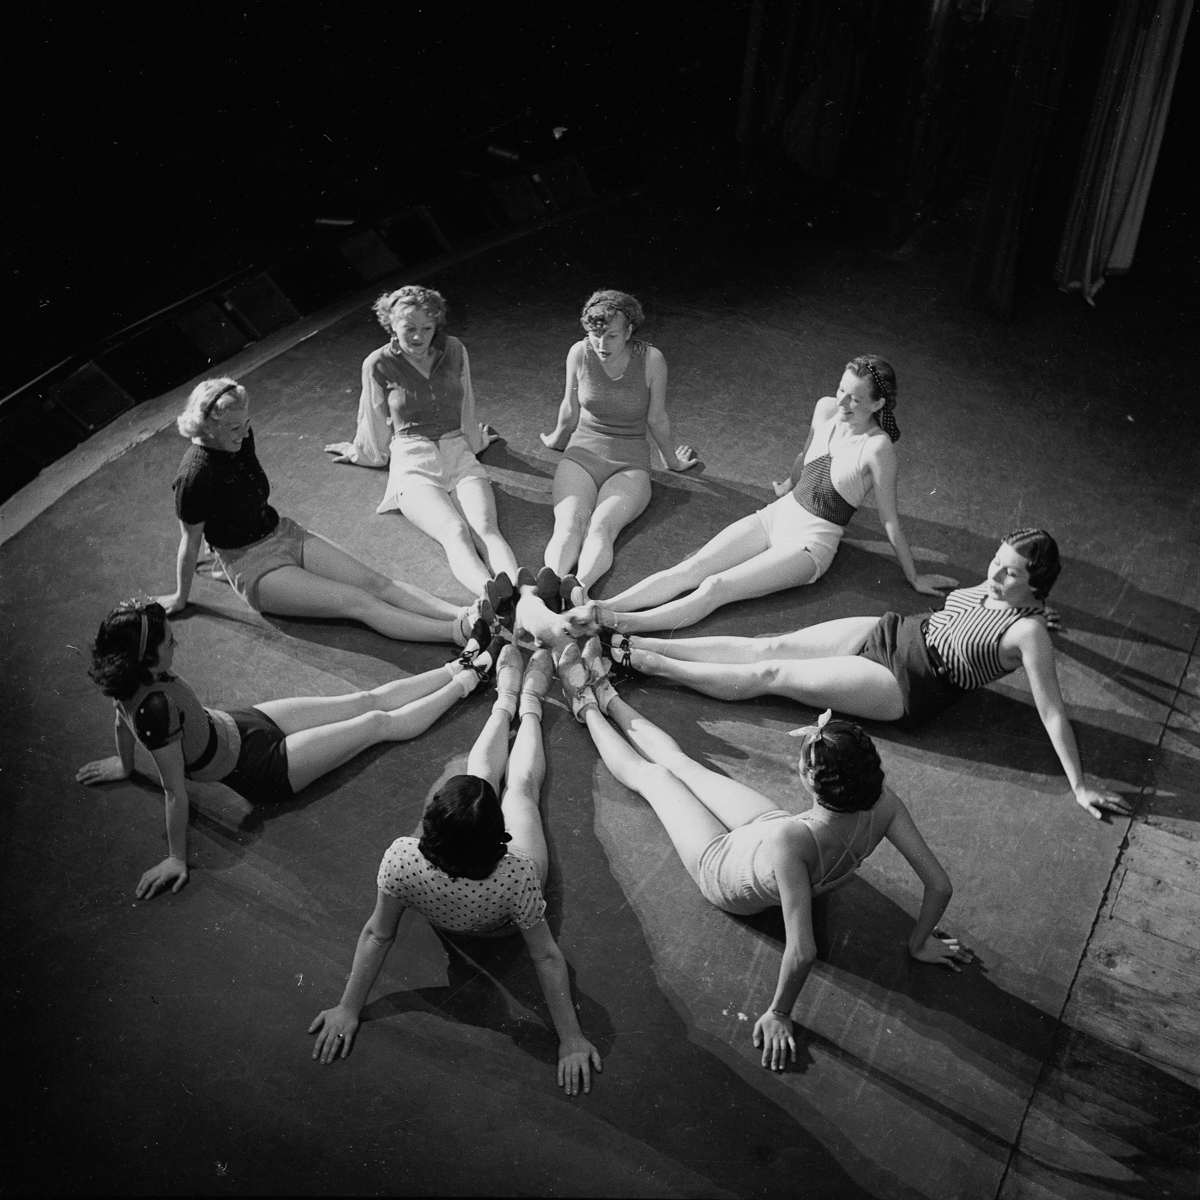 Rehearse at the Folies-Bergere. Paris, about 1937-